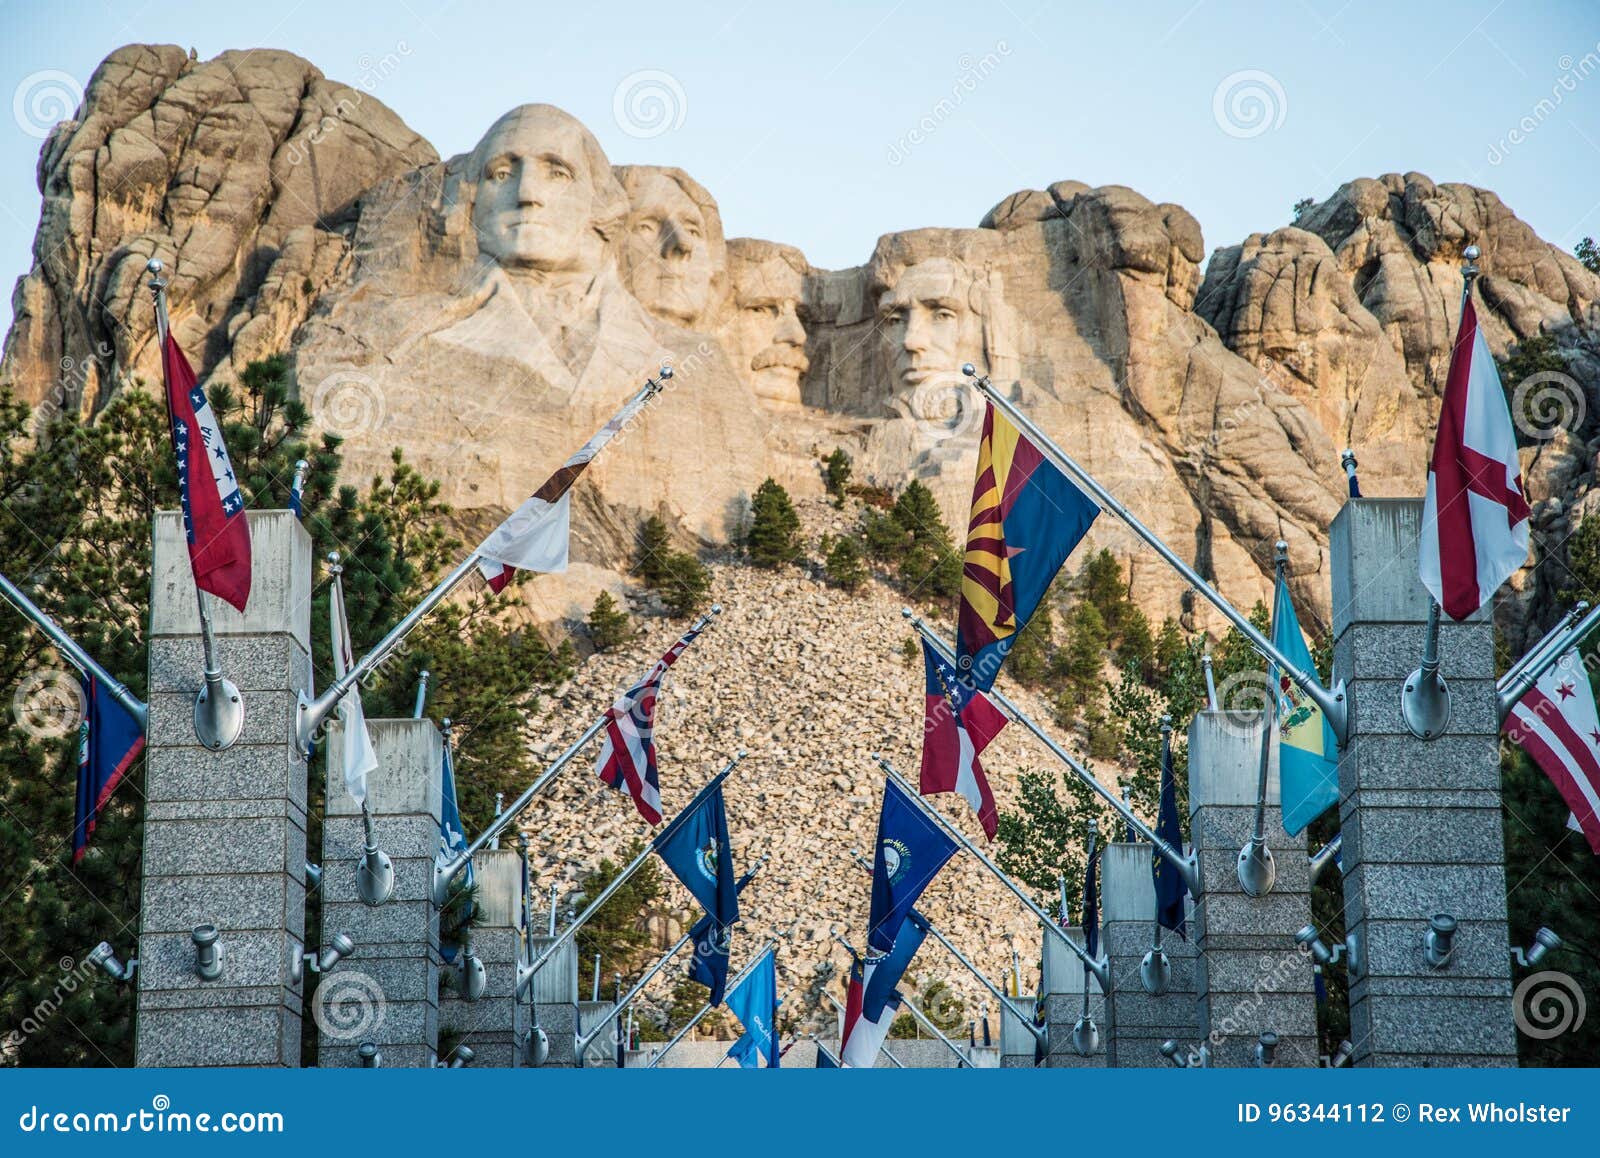 walk of flags entry at mount rushmore